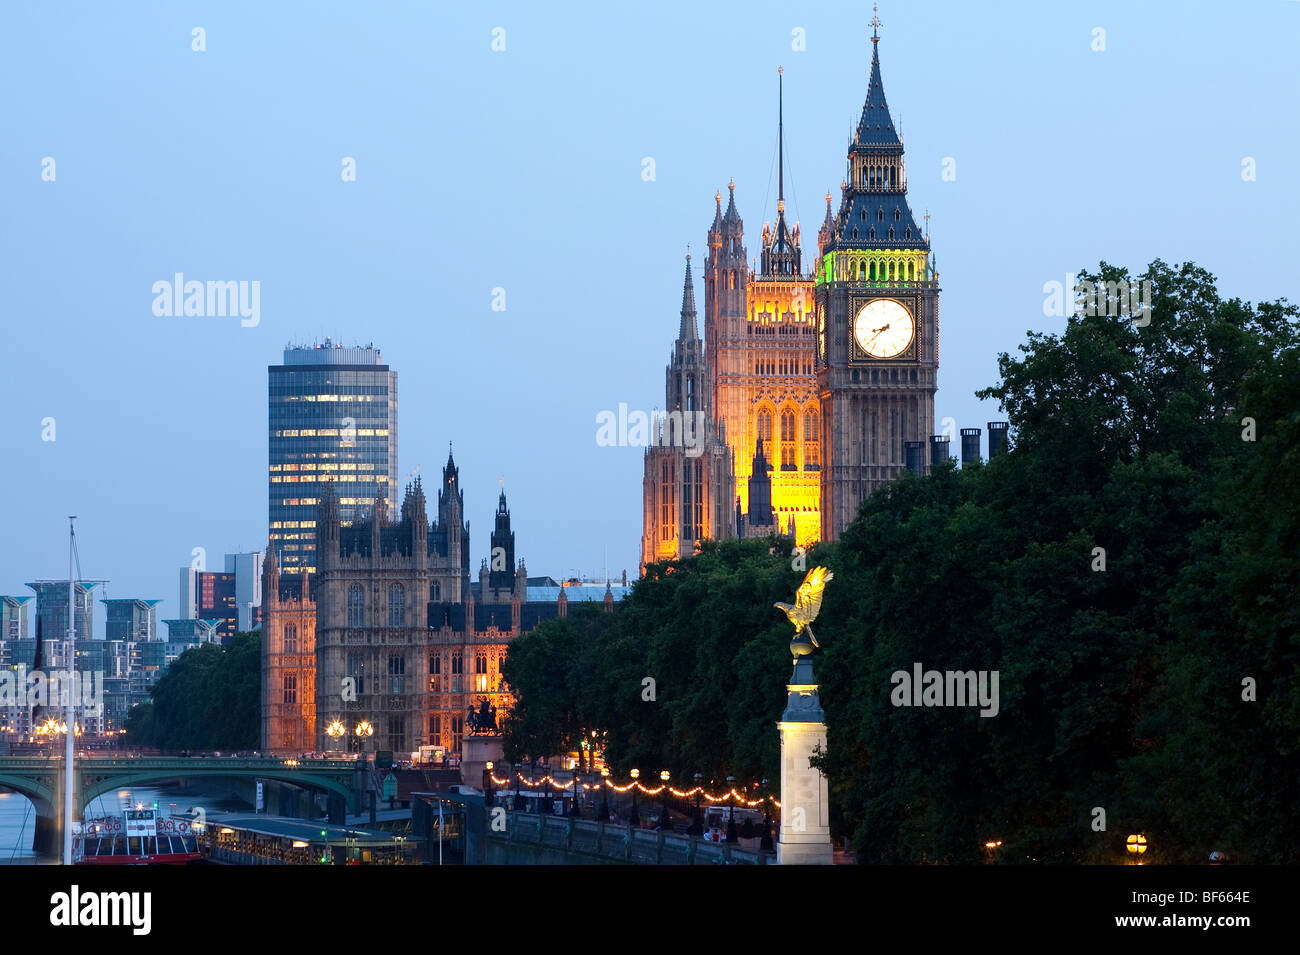 Night shot of the Houses of Parliament, London Stock Photo